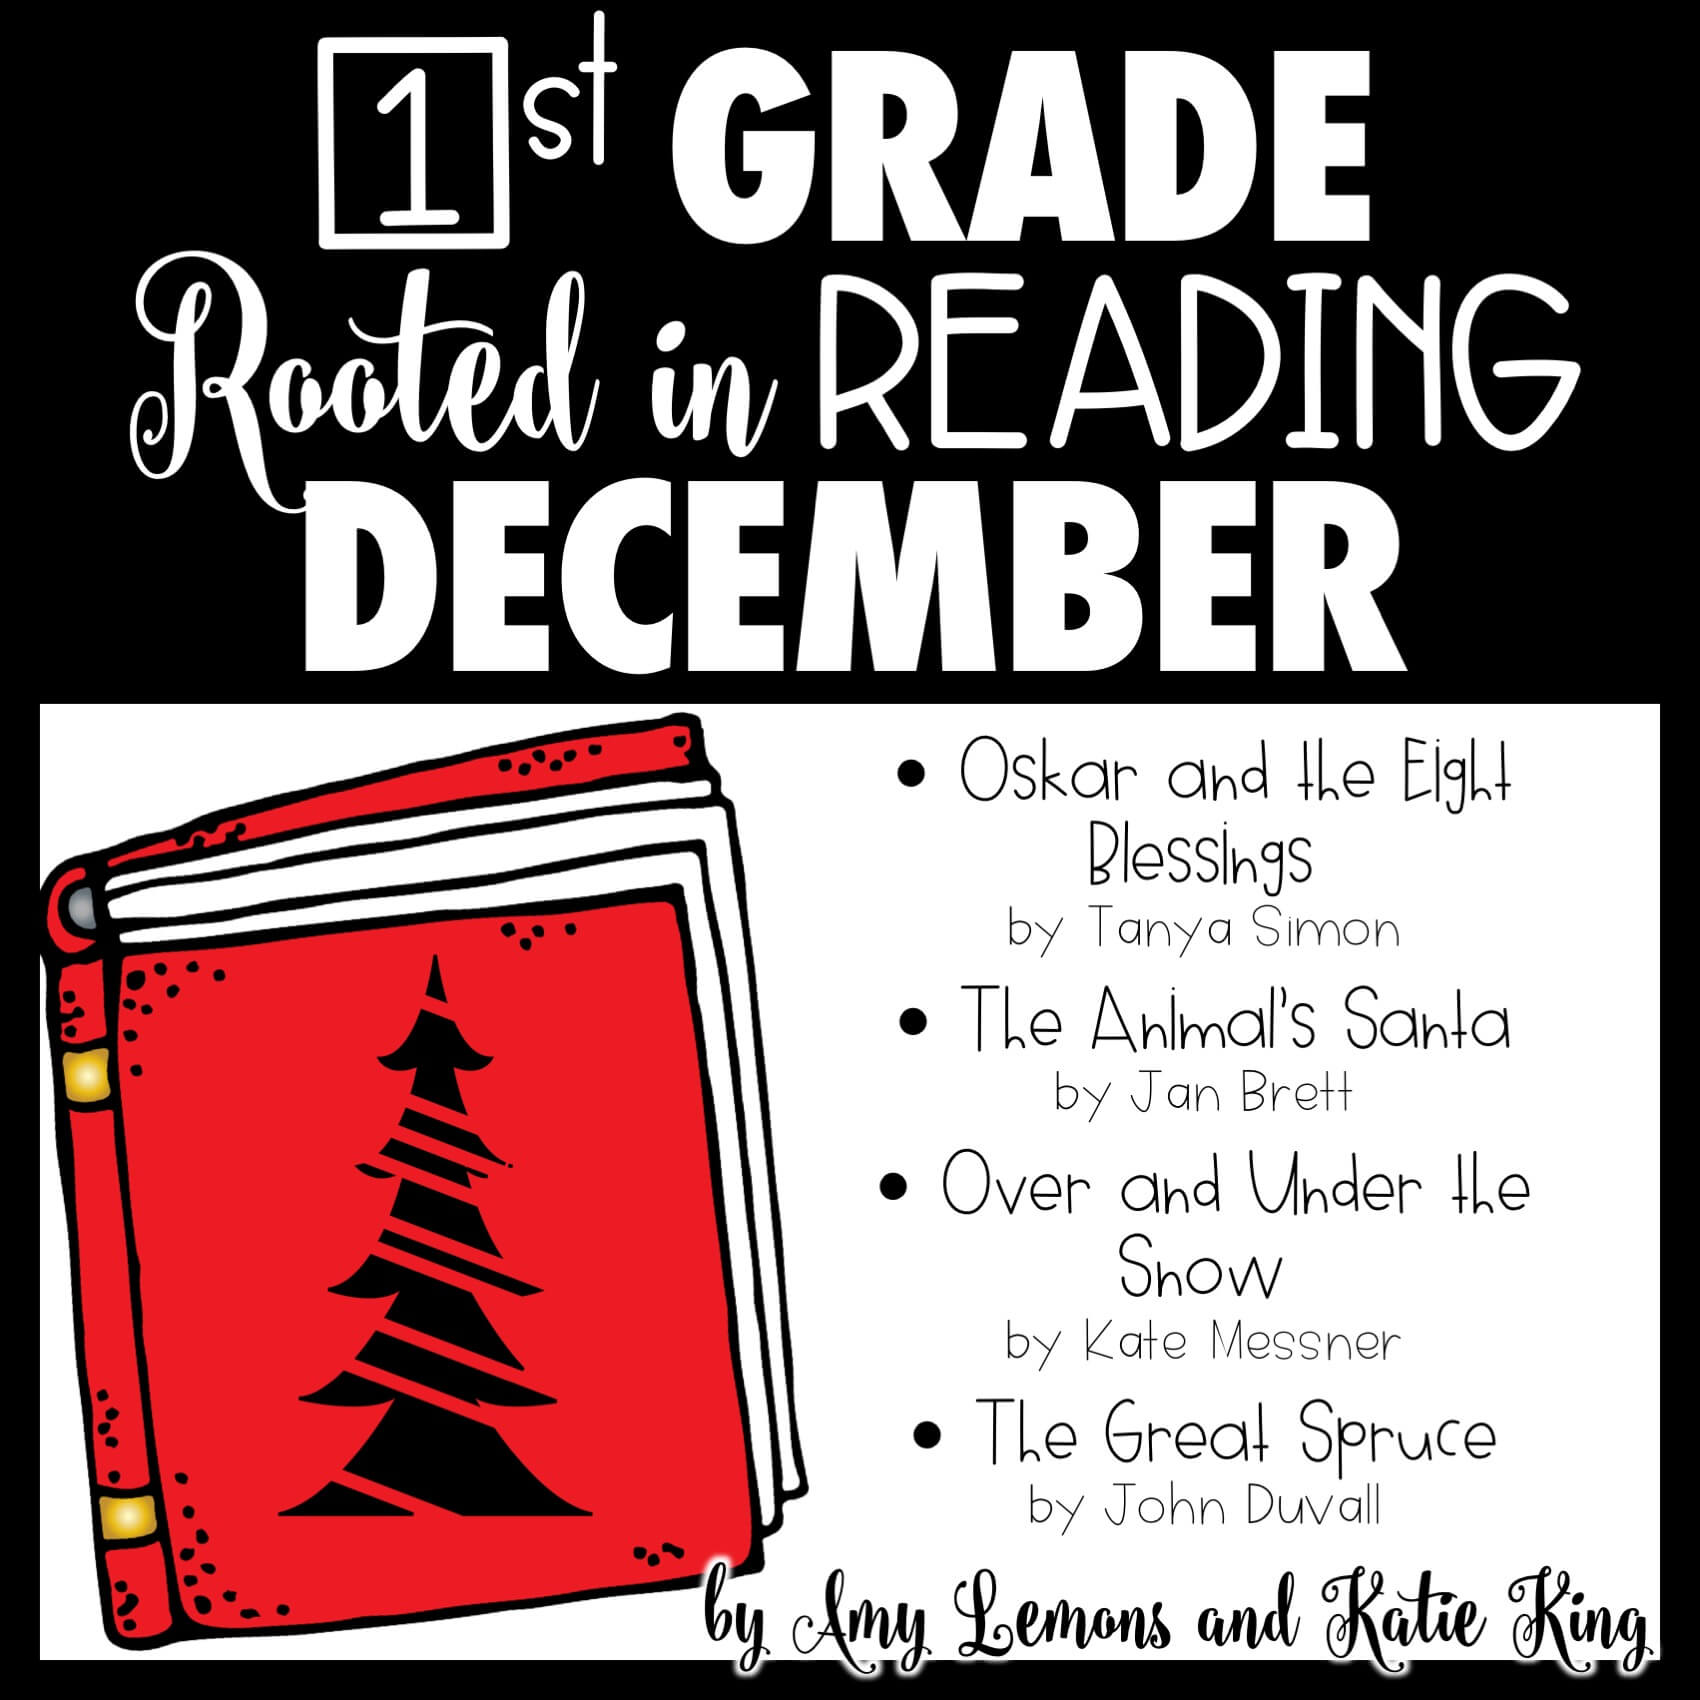 1st Grade Rooted in Reading December